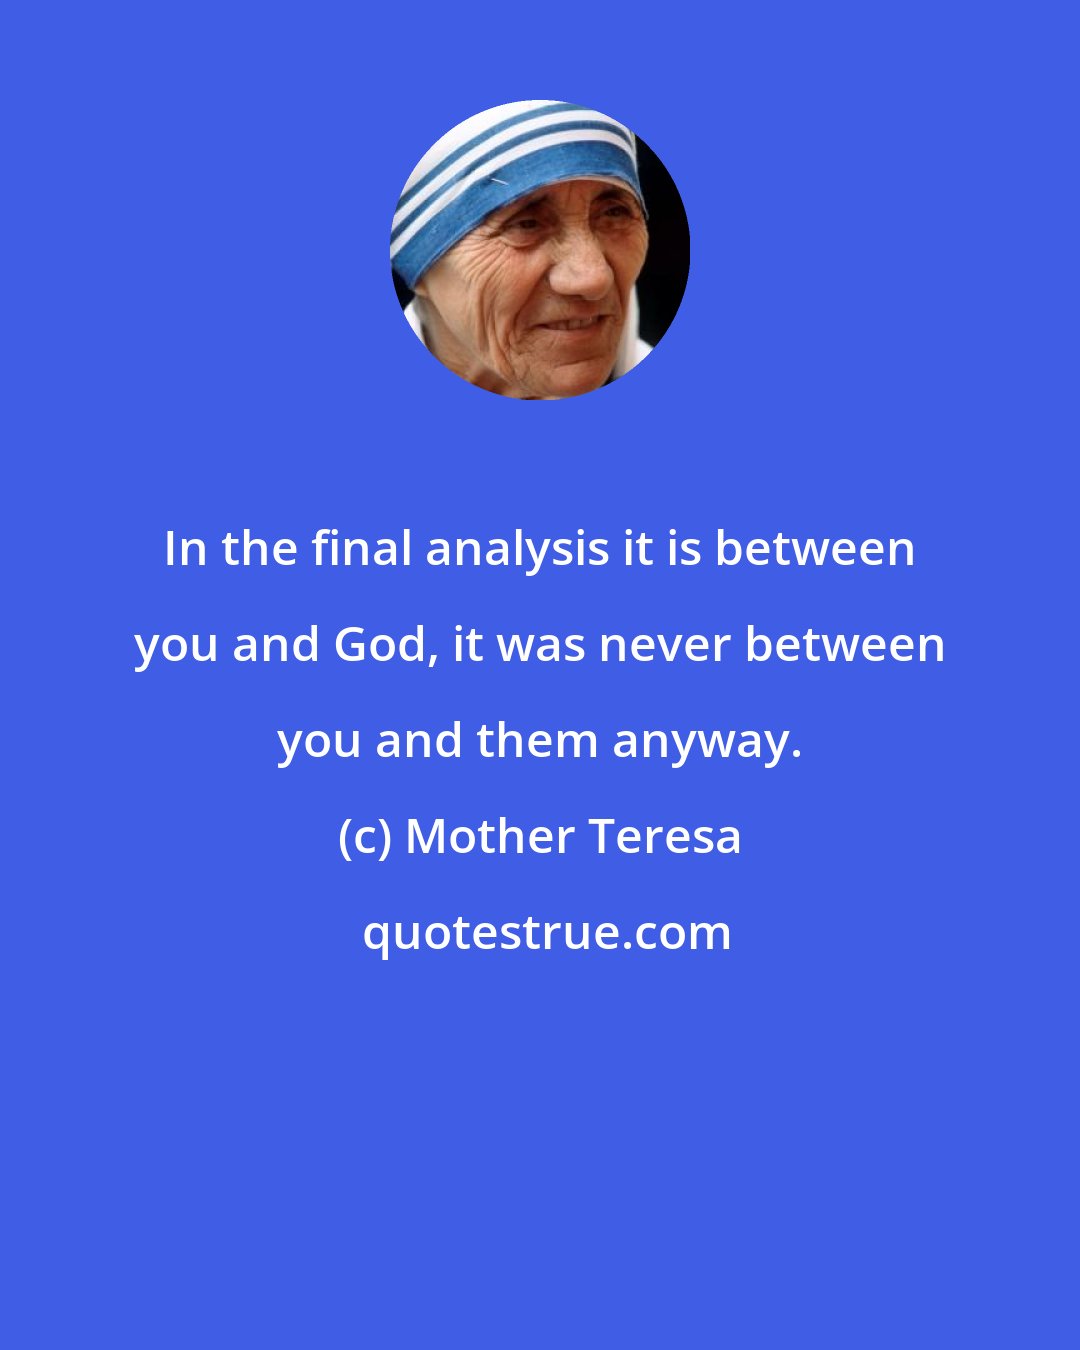 Mother Teresa: In the final analysis it is between you and God, it was never between you and them anyway.